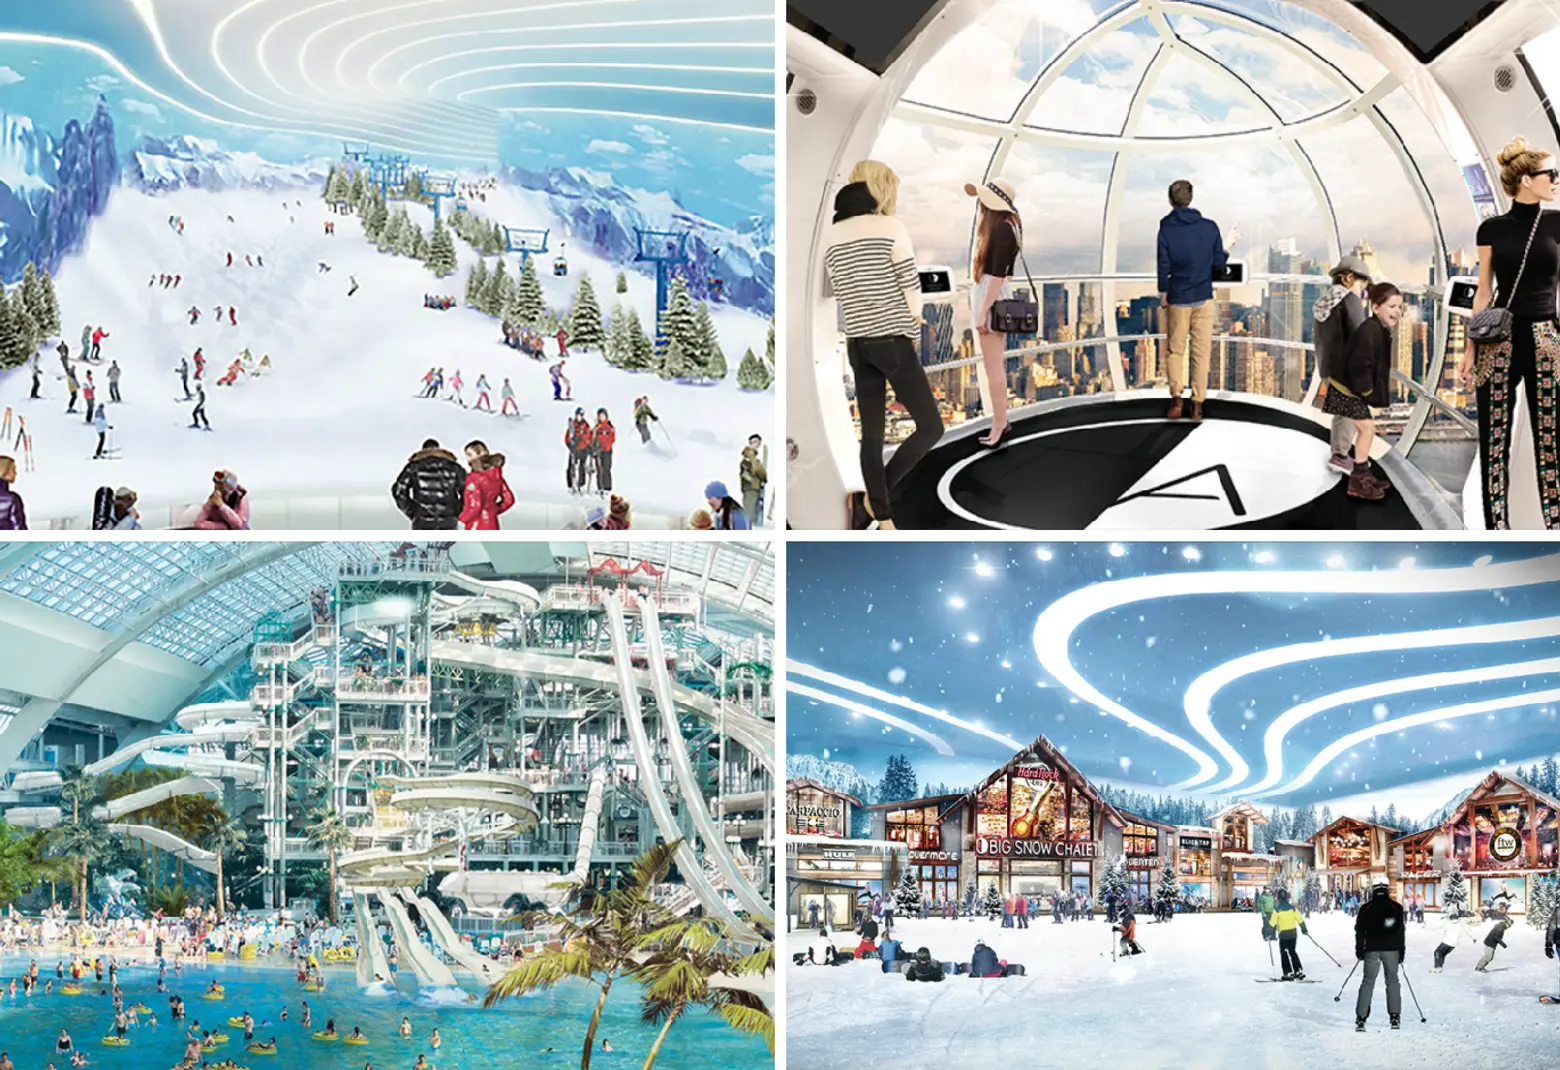 See the 800-foot indoor ski slope, water park, and observation wheel coming to North Jersey